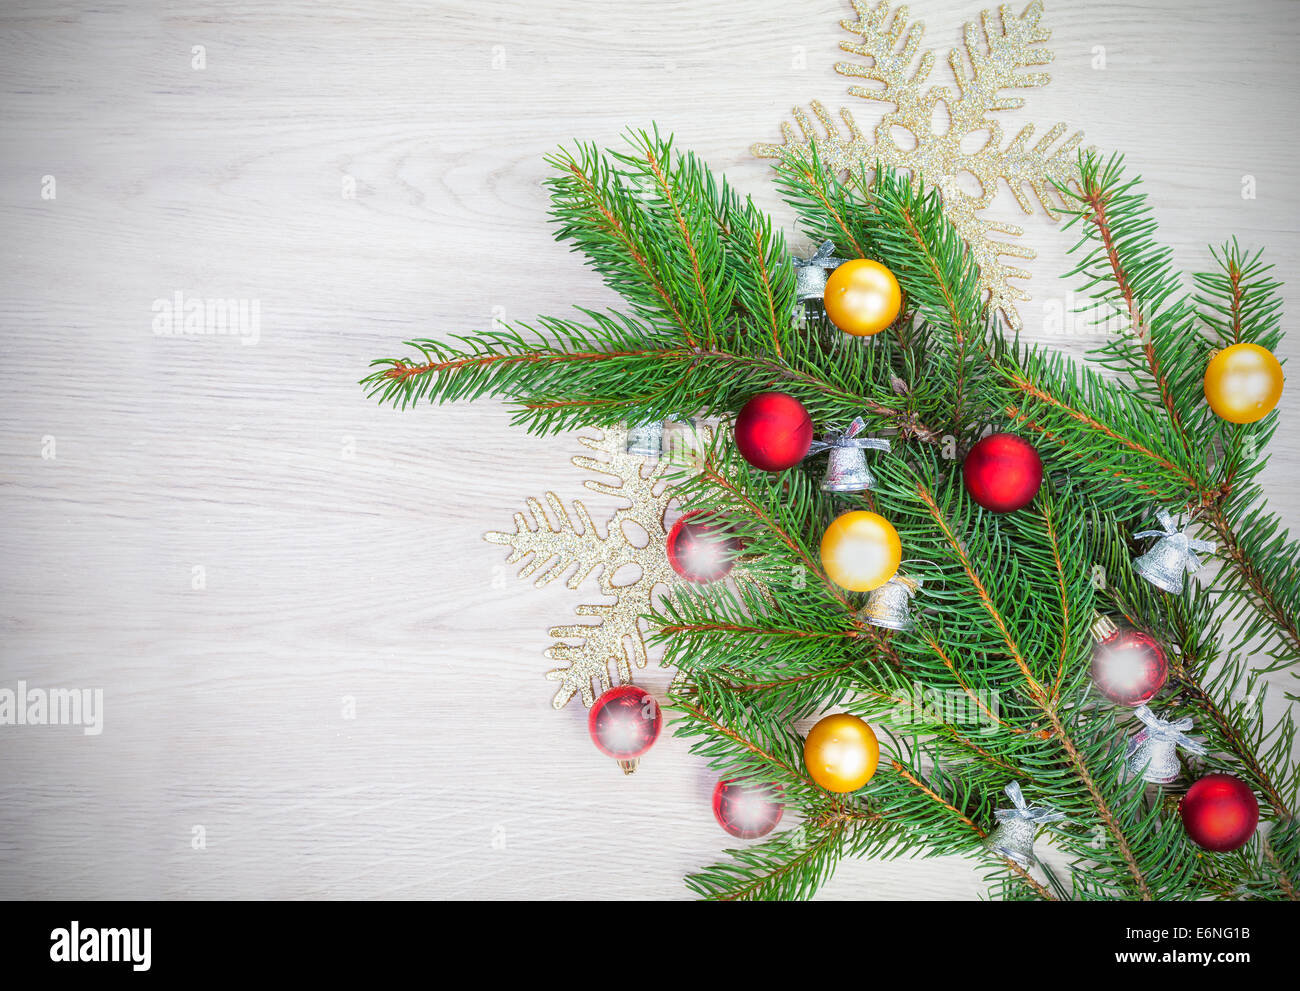 Christmas background, decoration on white wooden board. Stock Photo